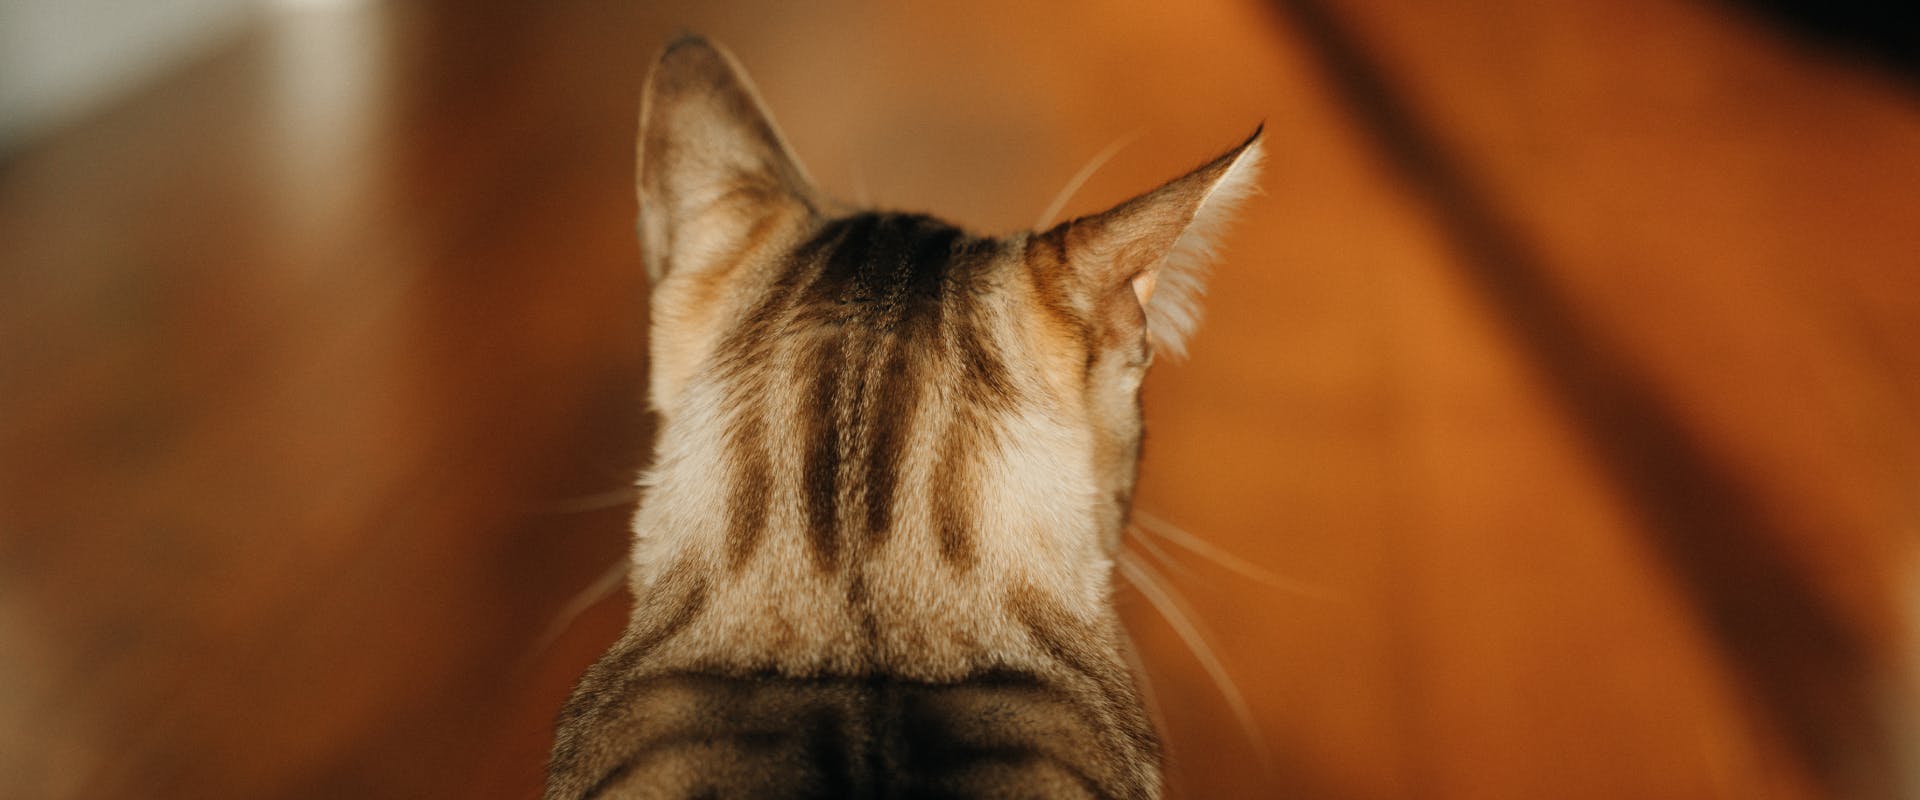 the back of the head of a cat that looks like a wild cat